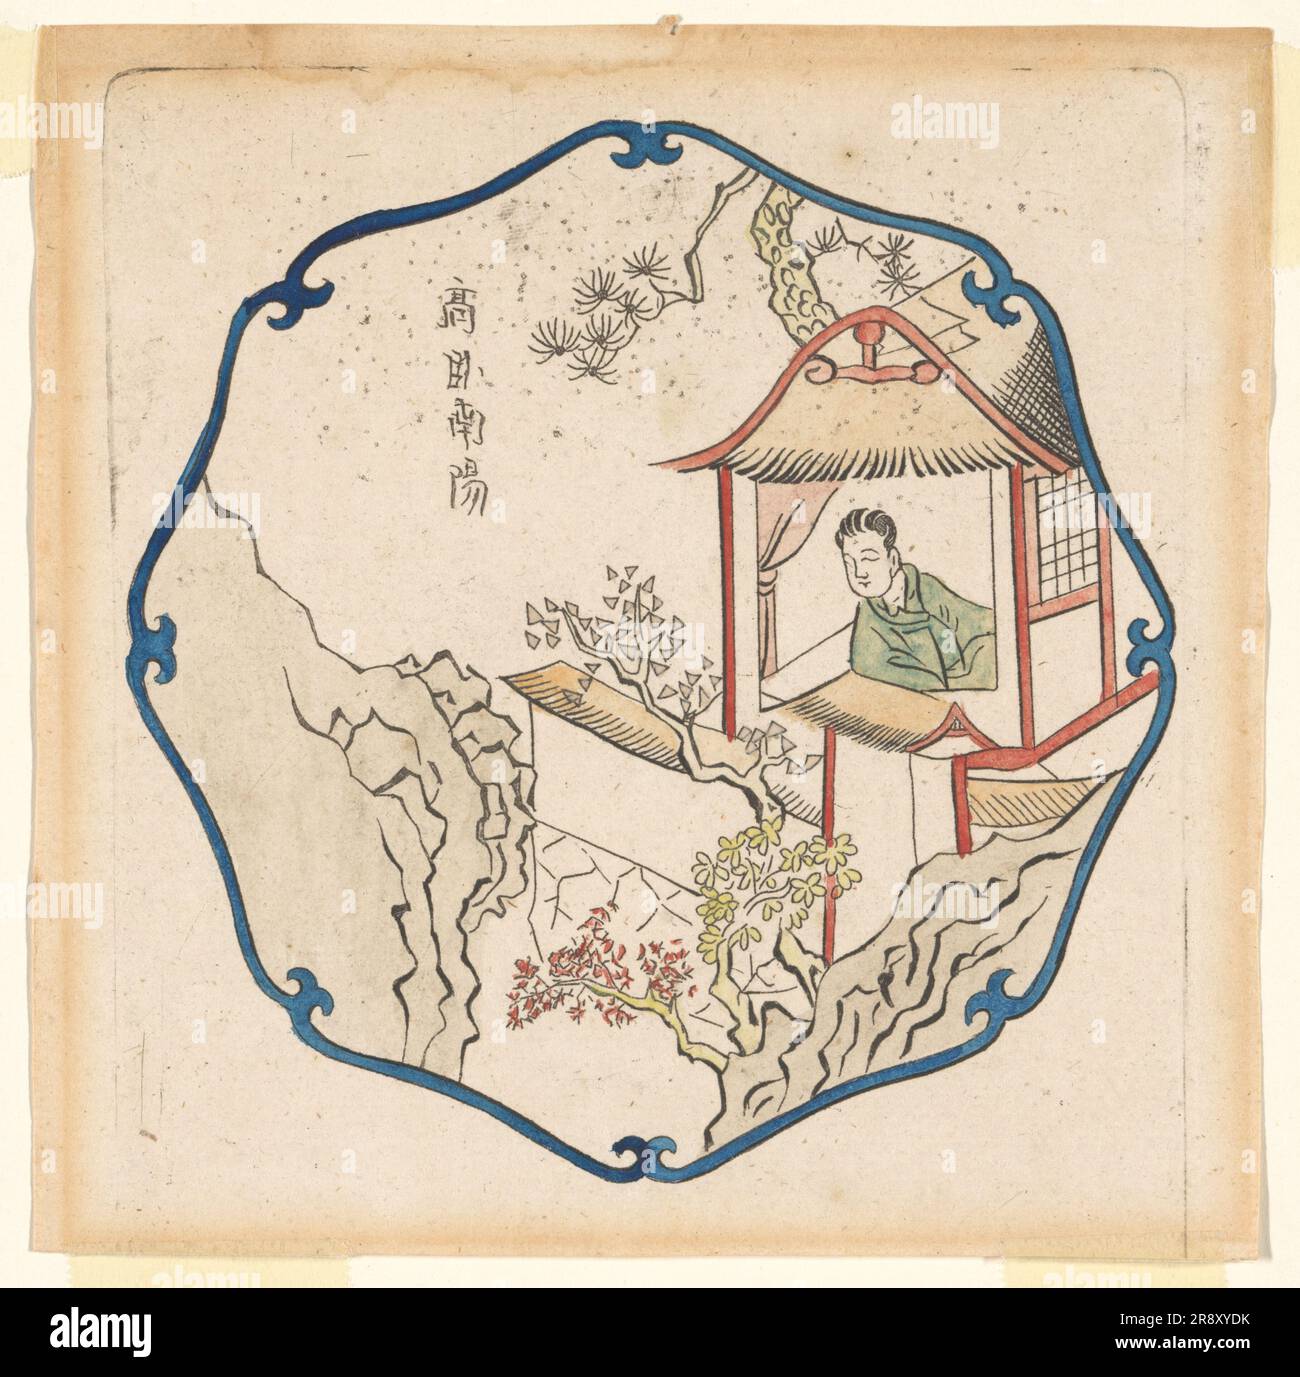 Carefree life in Hsin-yang, 1702. The poet Tao Yuanming (T'ao Ch'ien) looks out on his garden in Hsin-Yang, enjoying his retirement from the civil service. One of a series illustrating Chinese history, which Schenk the elder copied from Chinese woodcuts. Stock Photo